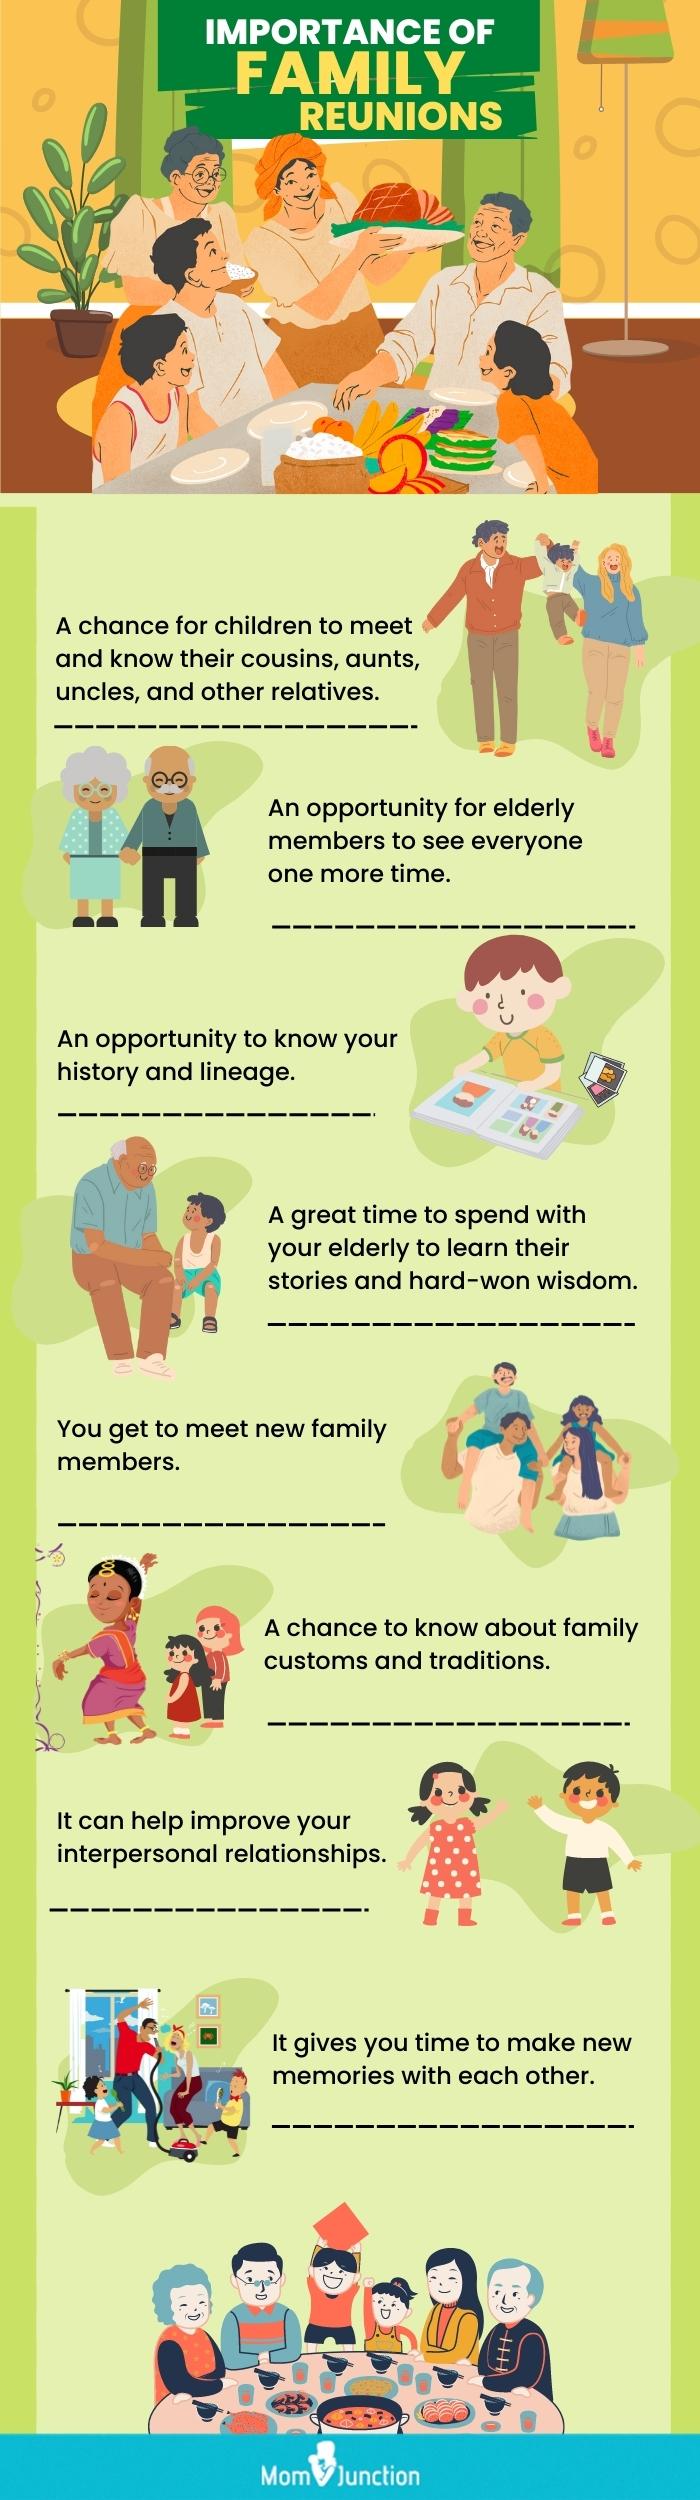 importance of family reunions [infographic]